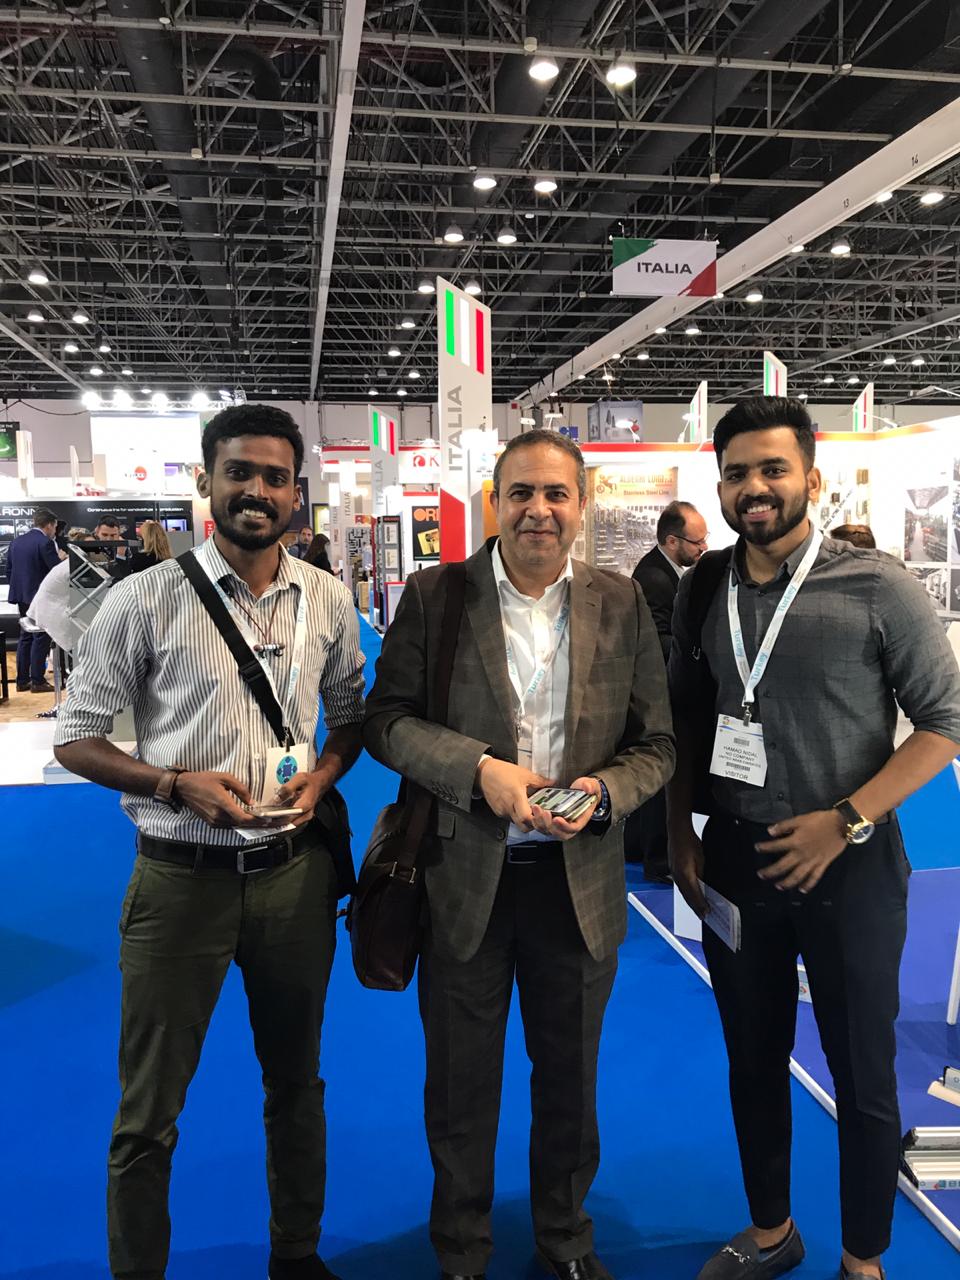 It is an honor and a privilege for Material Bidders to participate in “The Big 5 Dubai” exhibition that was held from 26 - 29 November 2018.